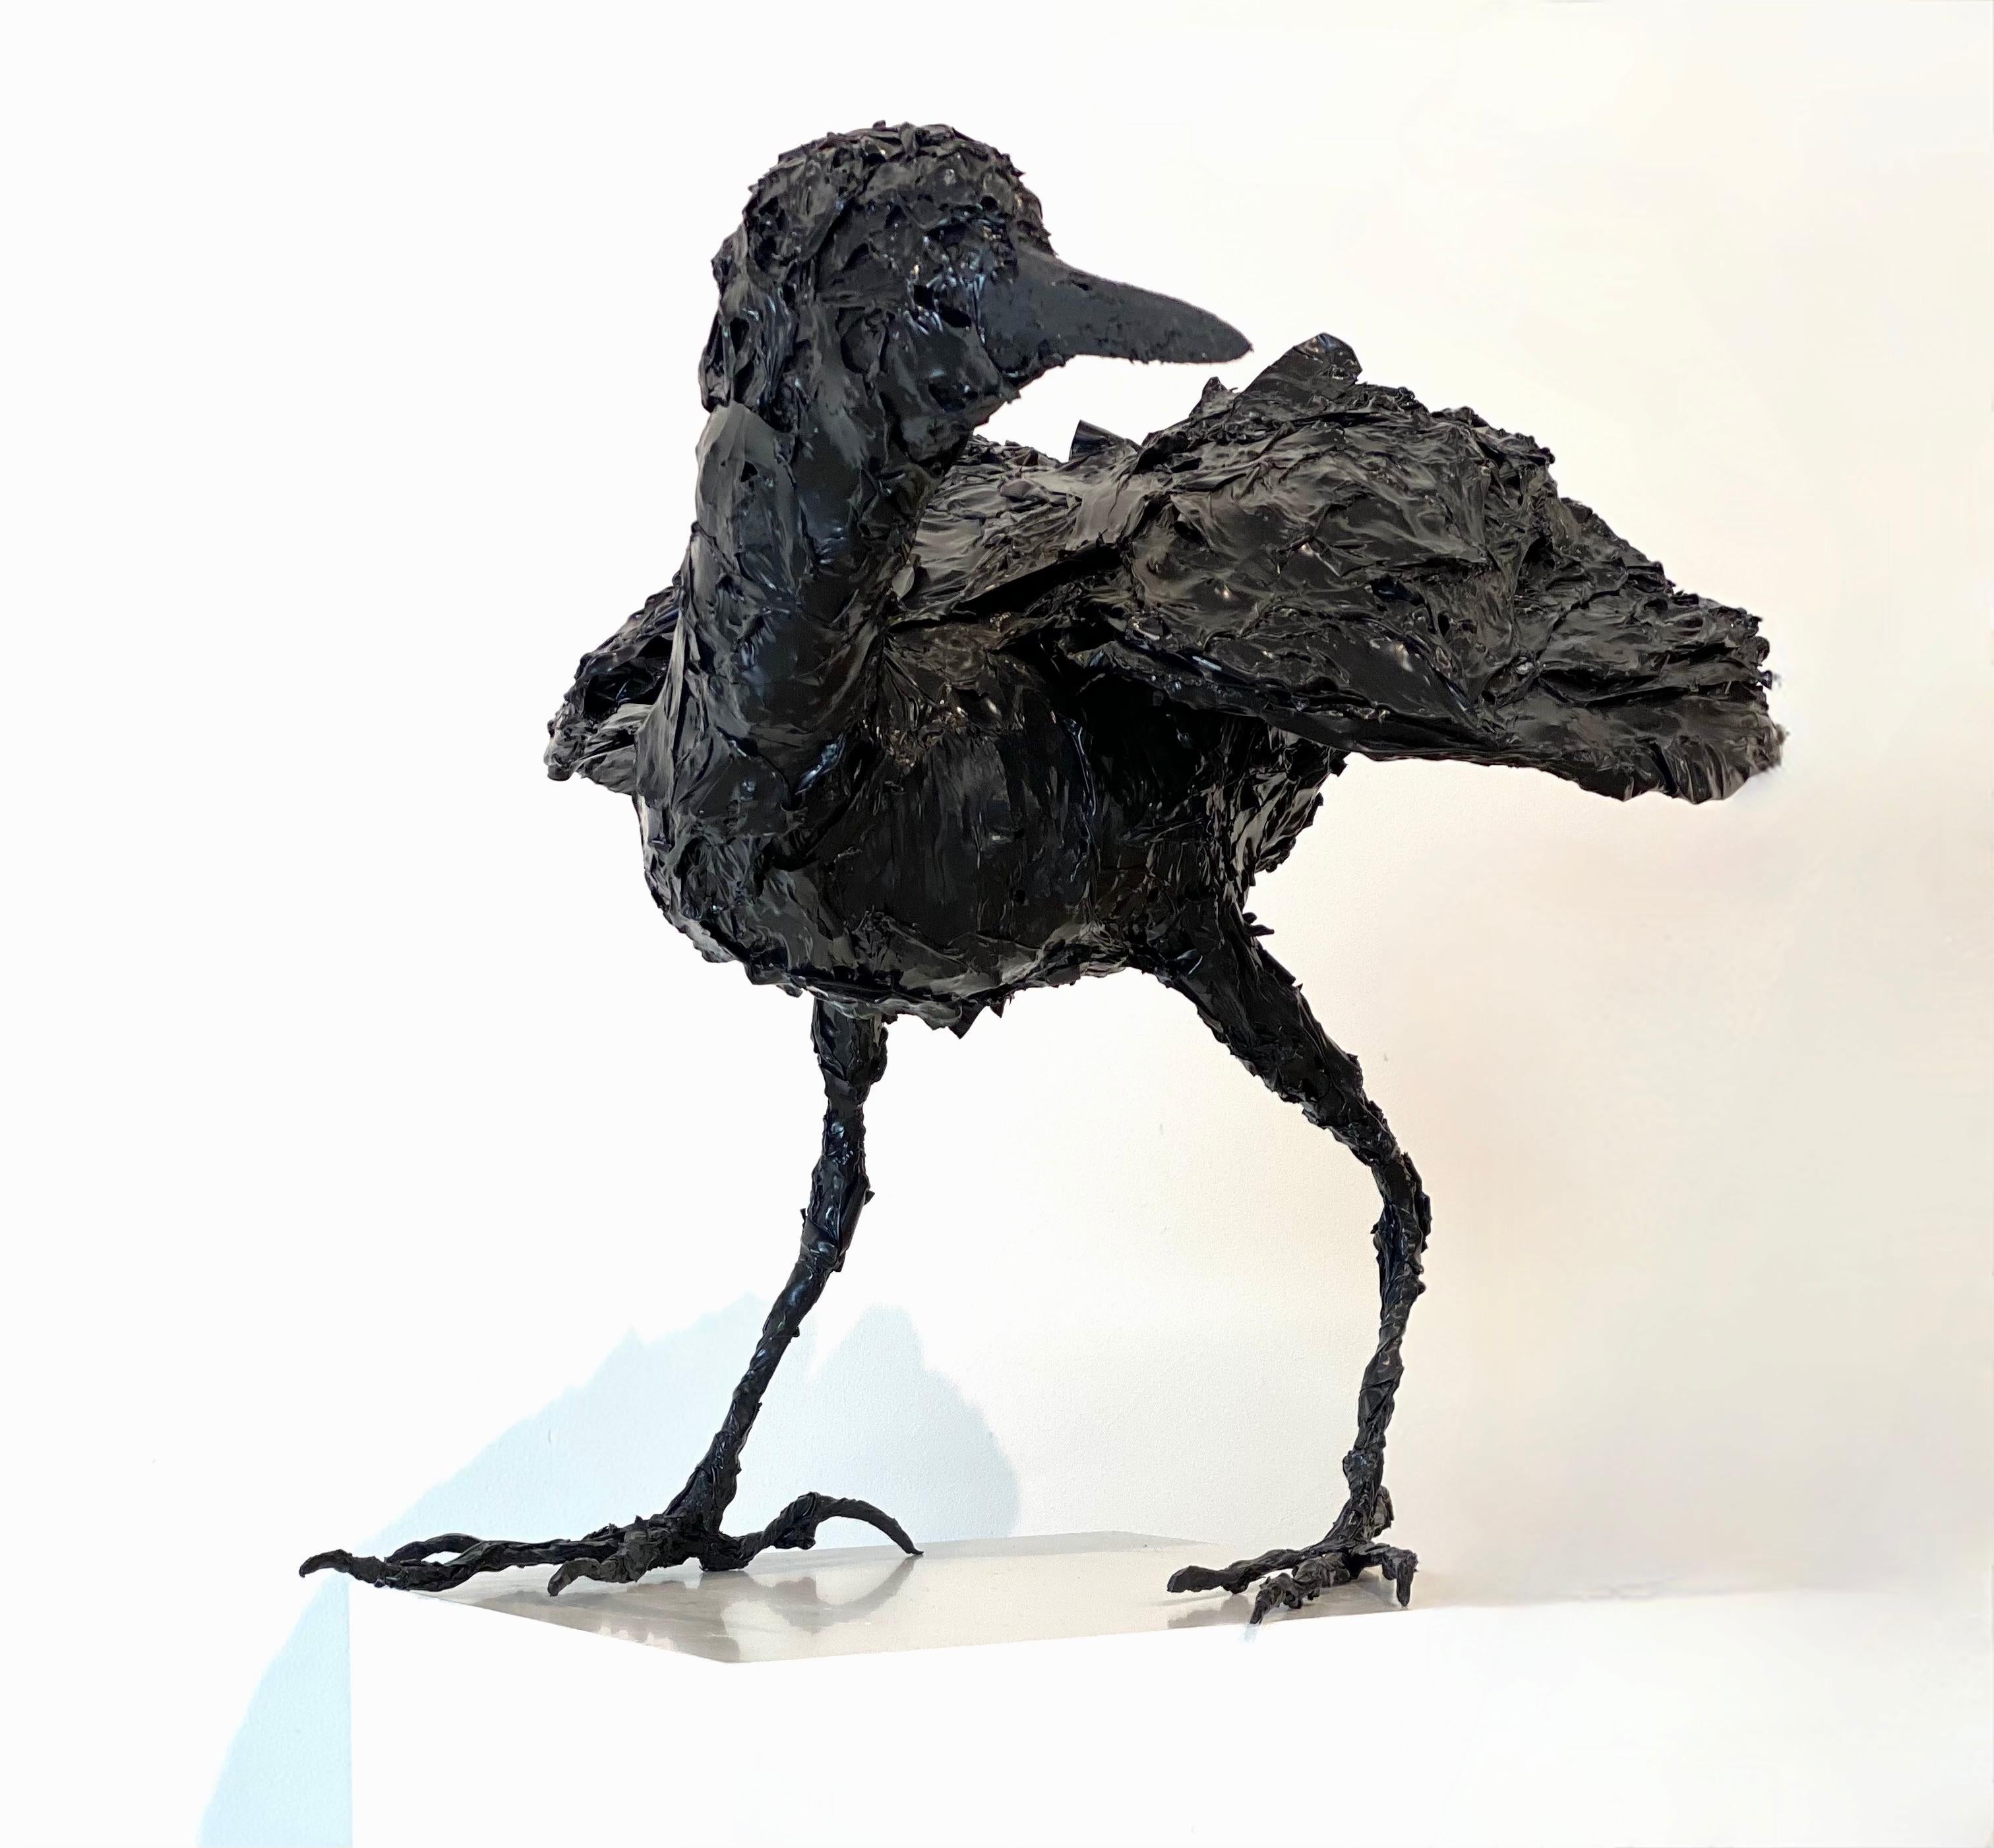 Bittern- 21st Century Sculpture of a Bird made out of recycled Black Plastics